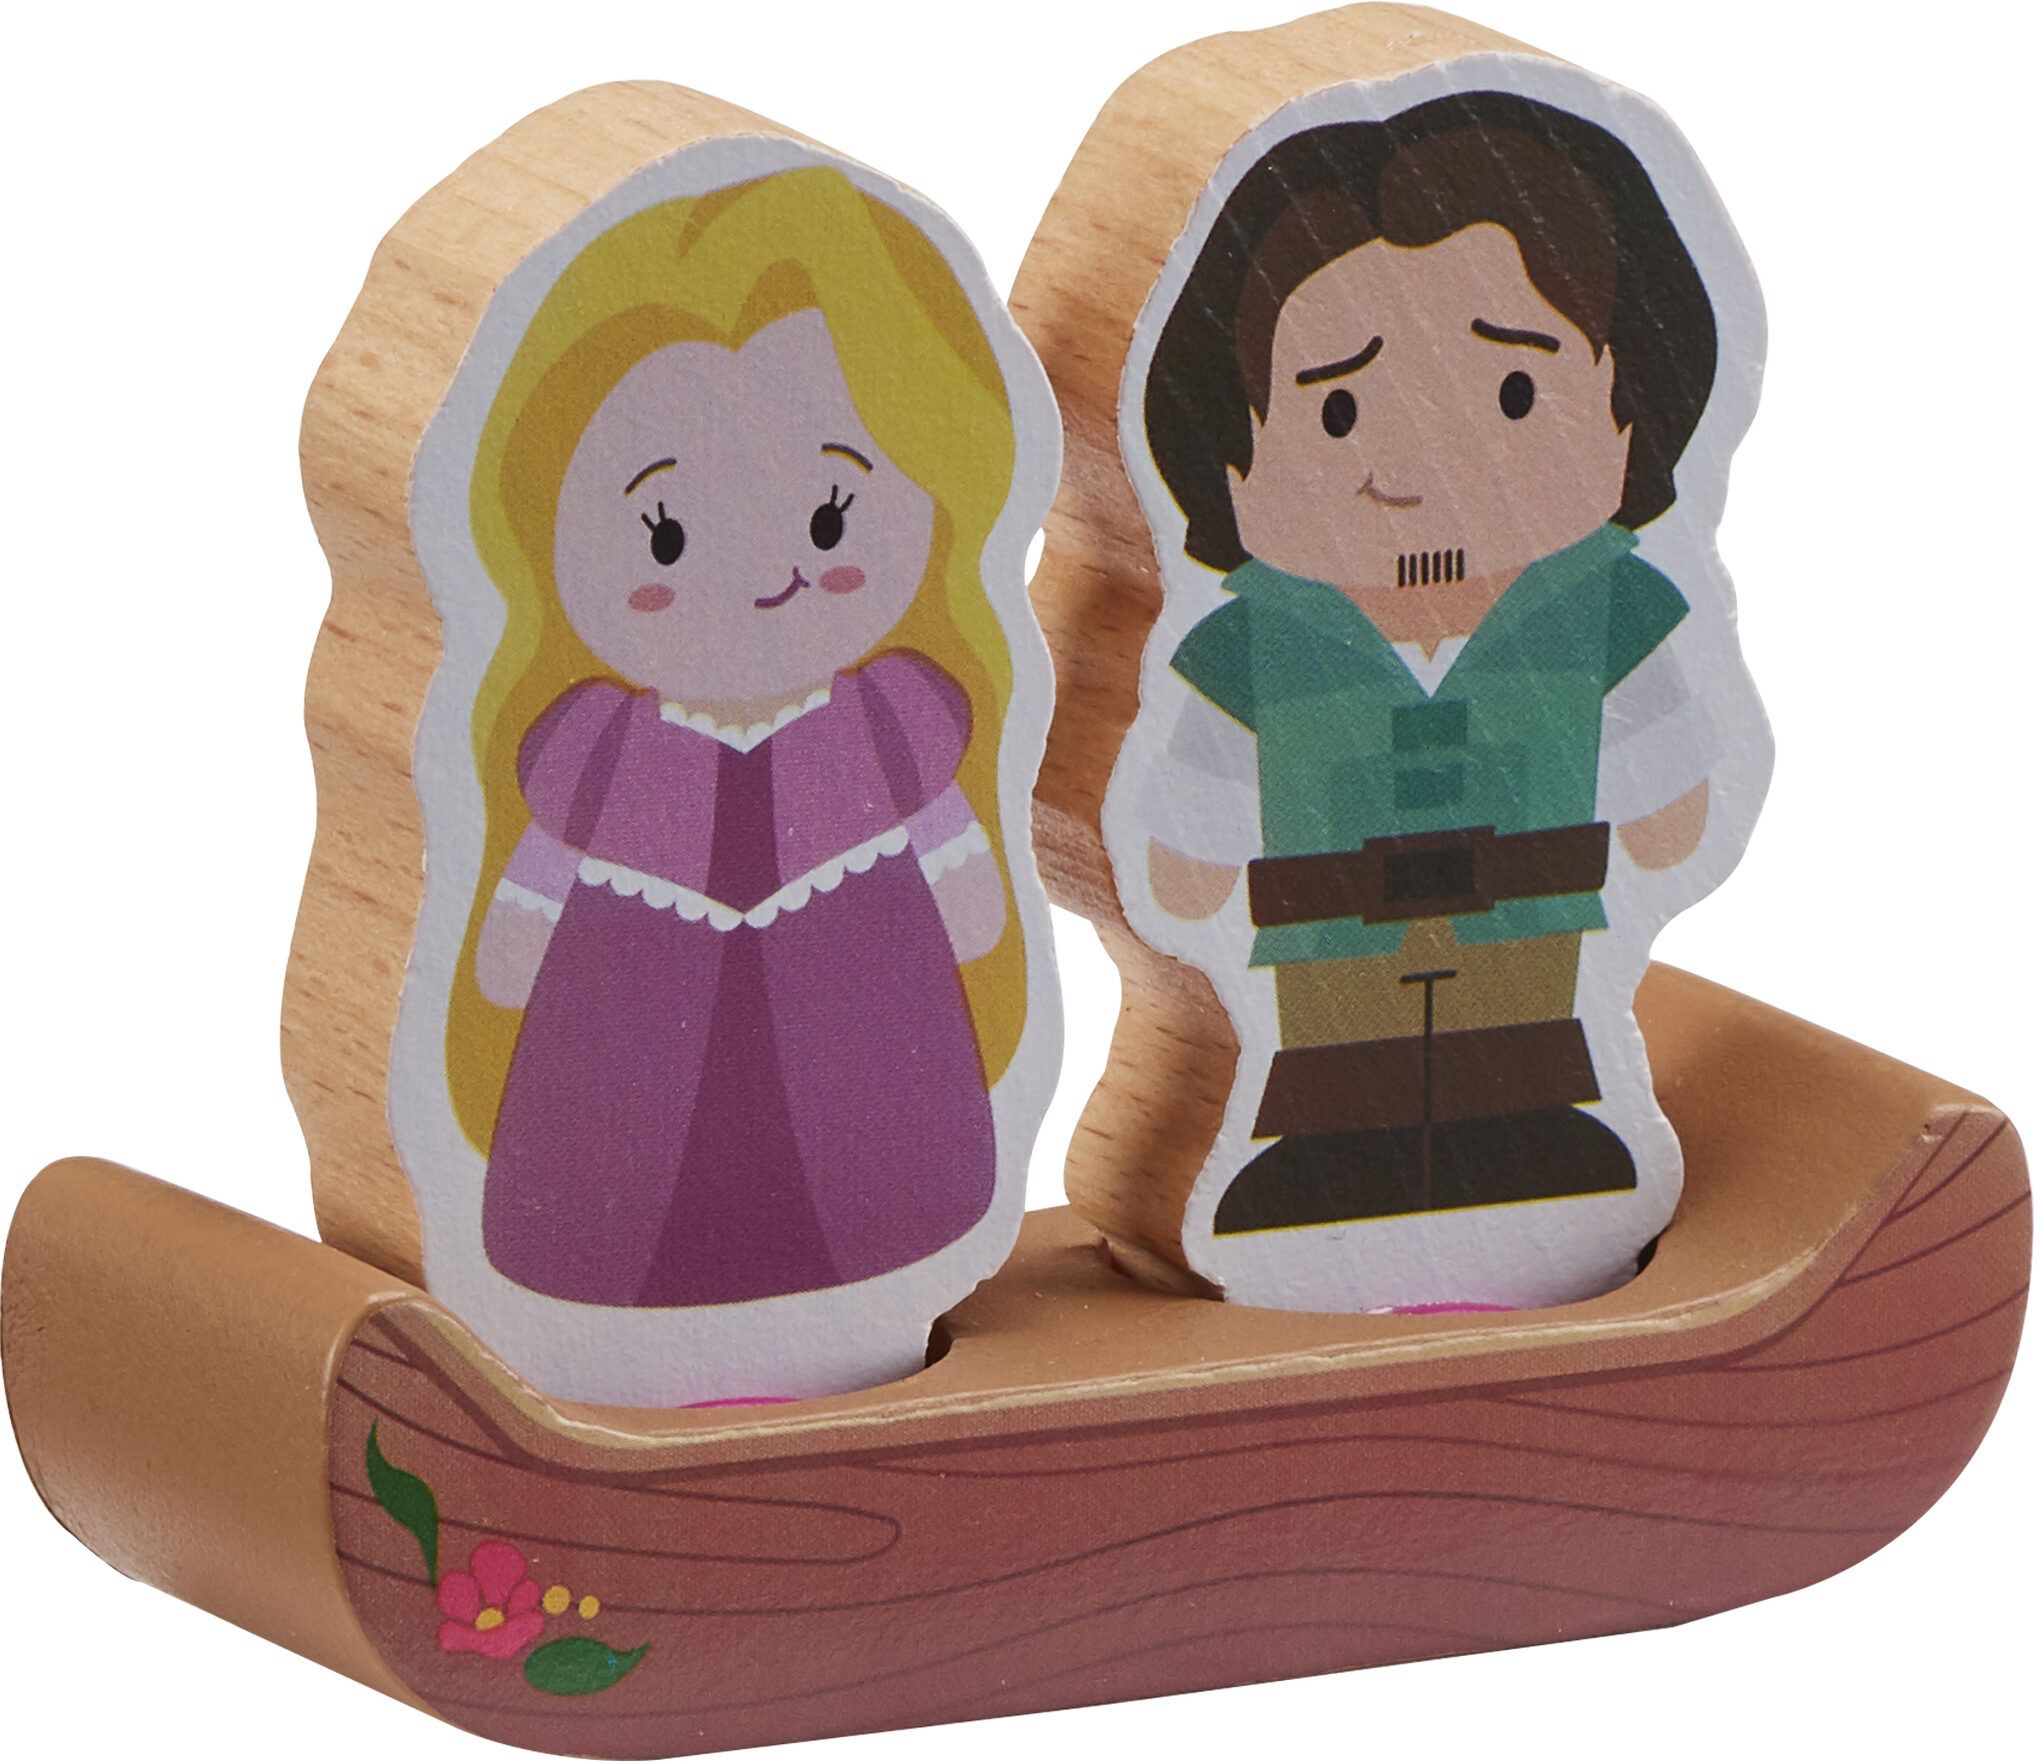 characters from rapunzel wooden figure set - disney princess toys - wooden disney figure set